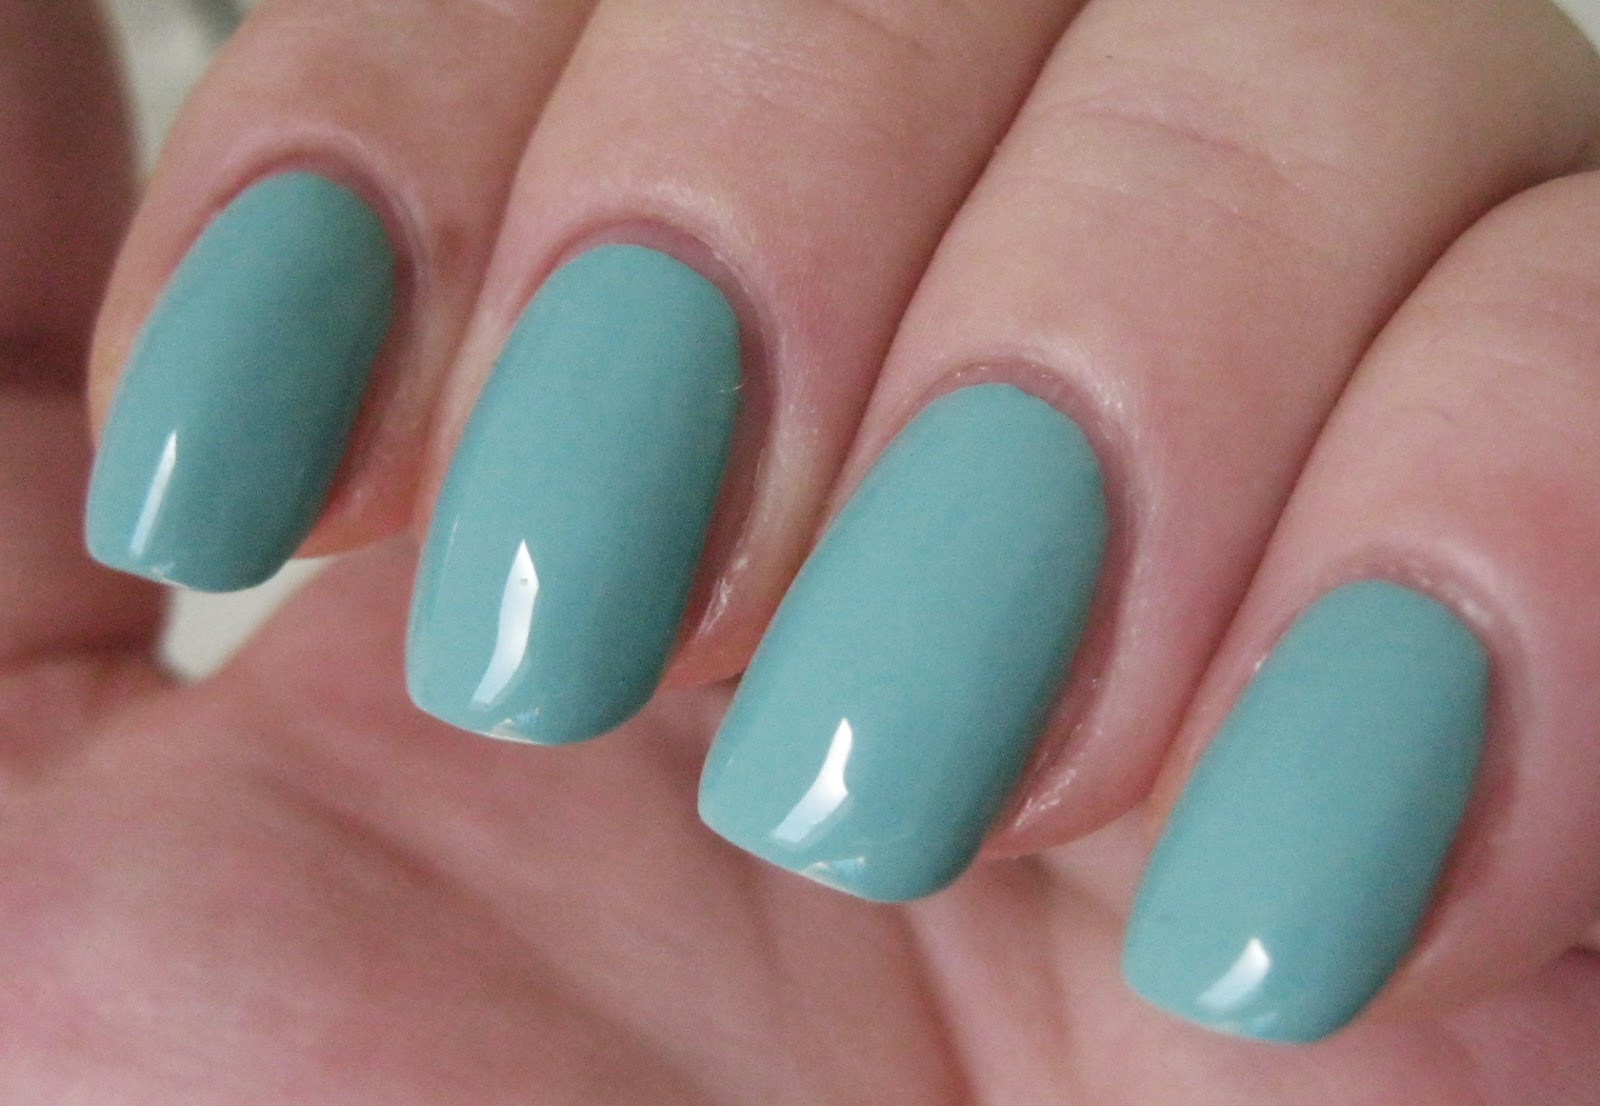 4. China Glaze Nail Lacquer in "For Audrey" - wide 7